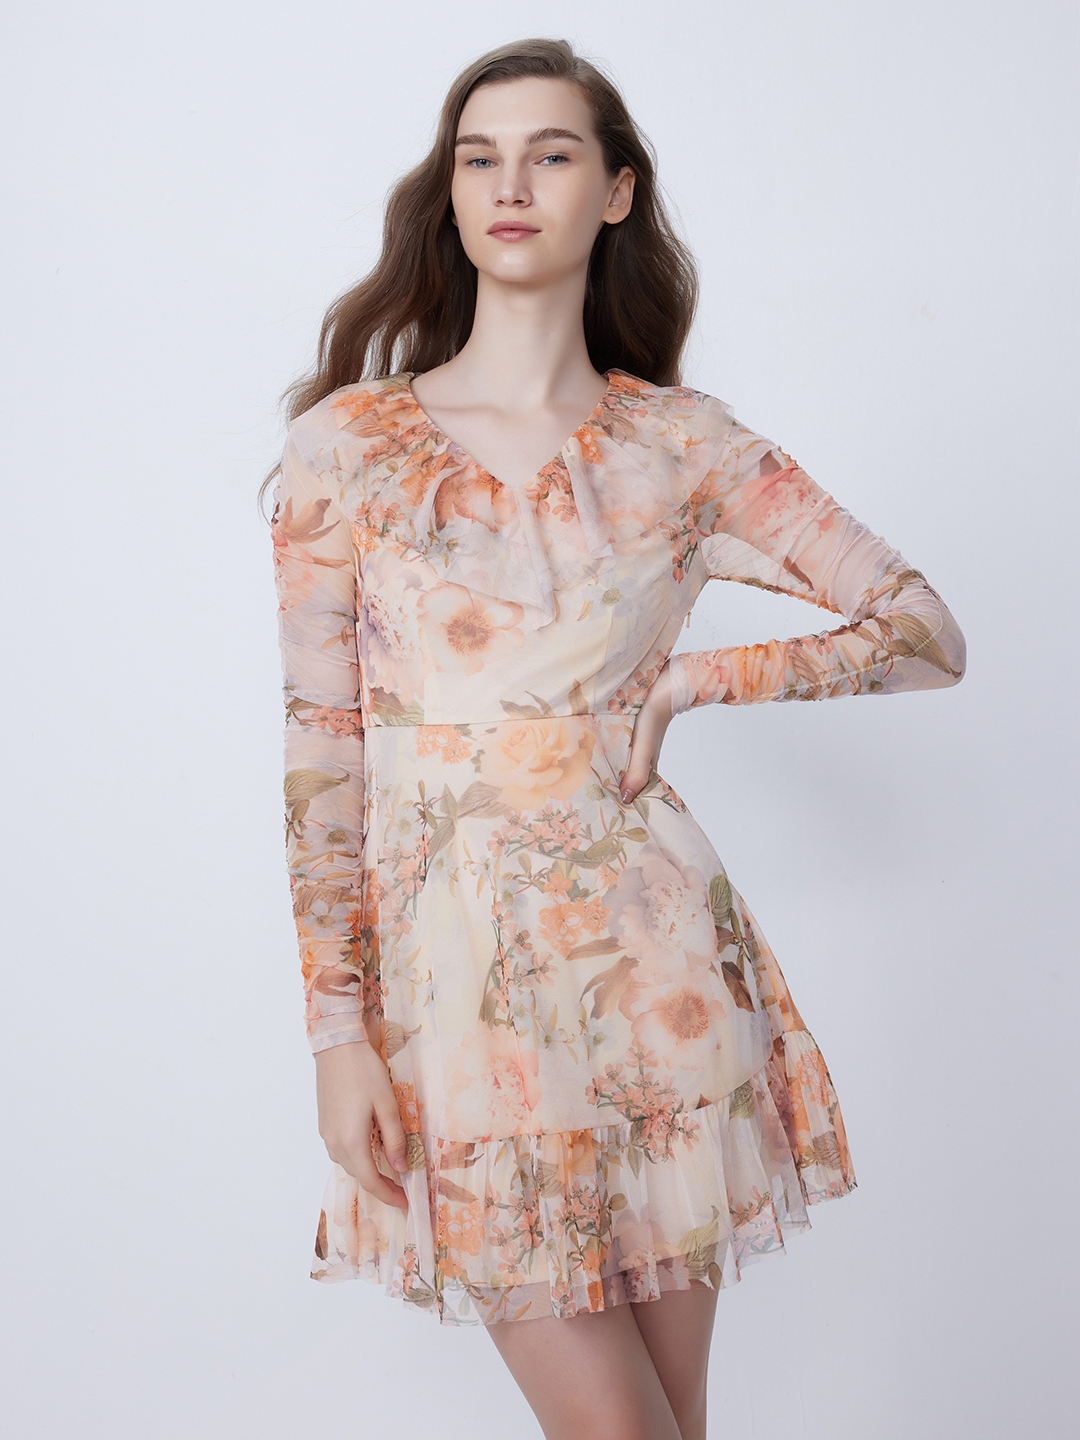 Buy COVER STORY Printed & Floral Dresses online - Women - 3 products |  FASHIOLA INDIA